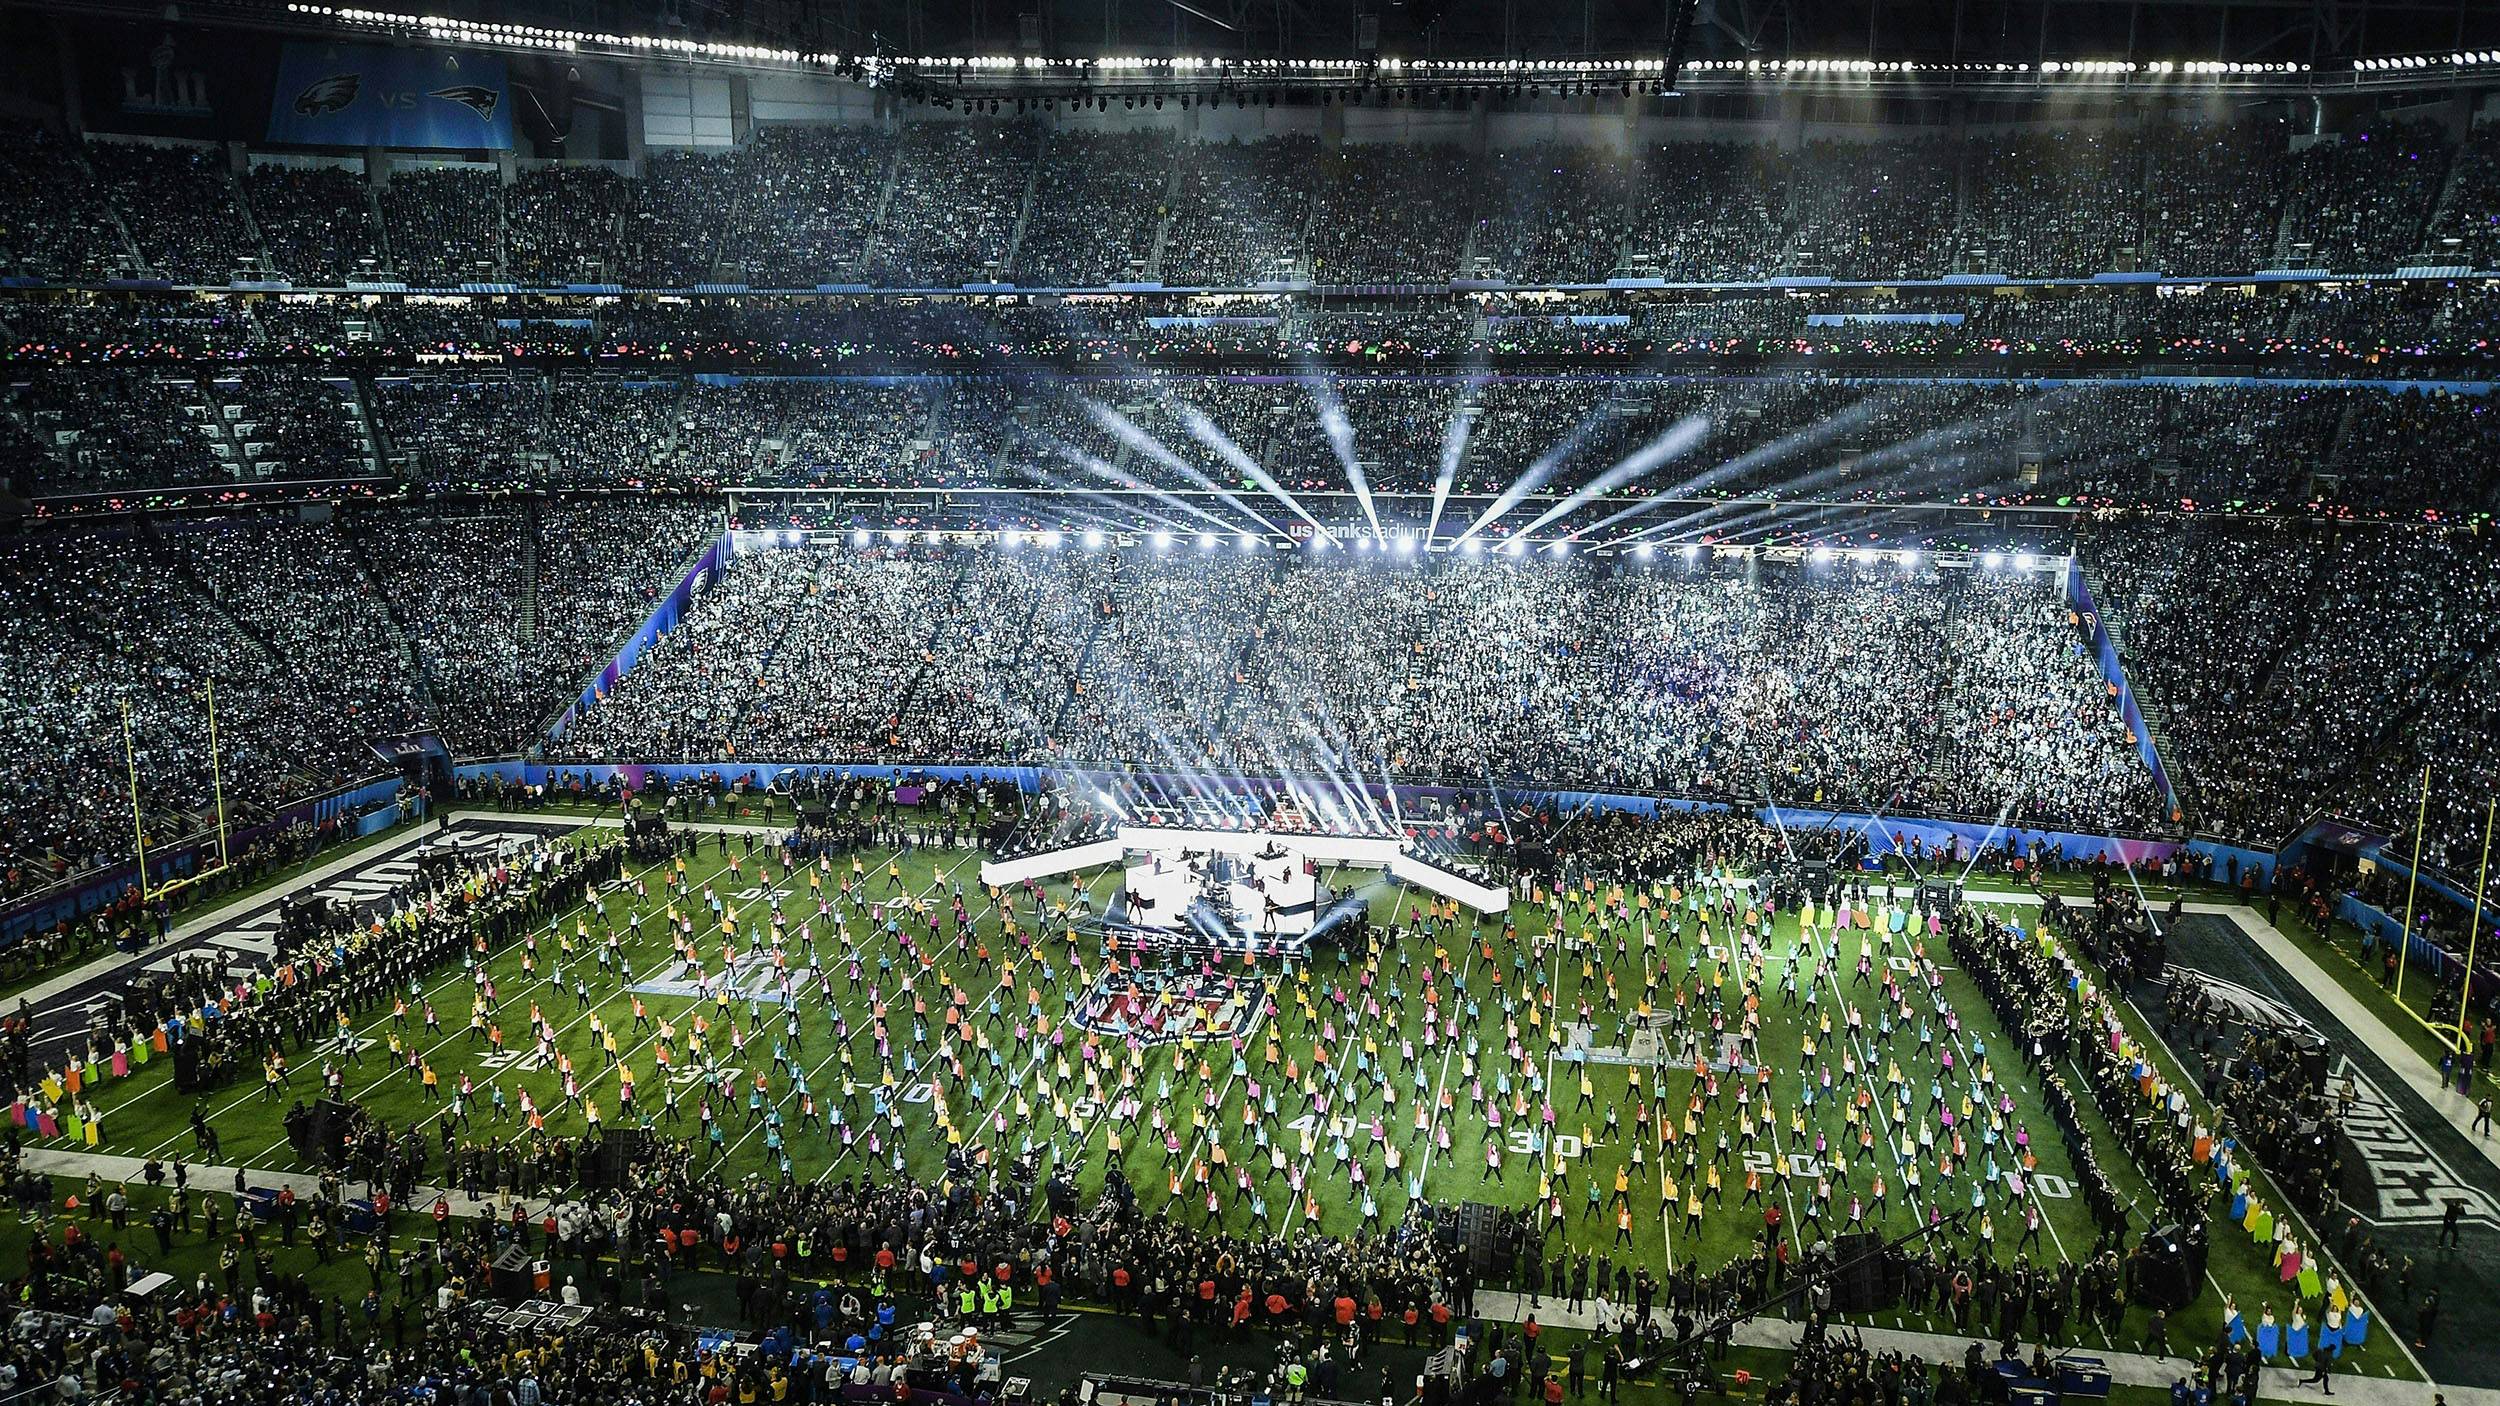 Super Bowl LVI: Everything you need to know, Sports